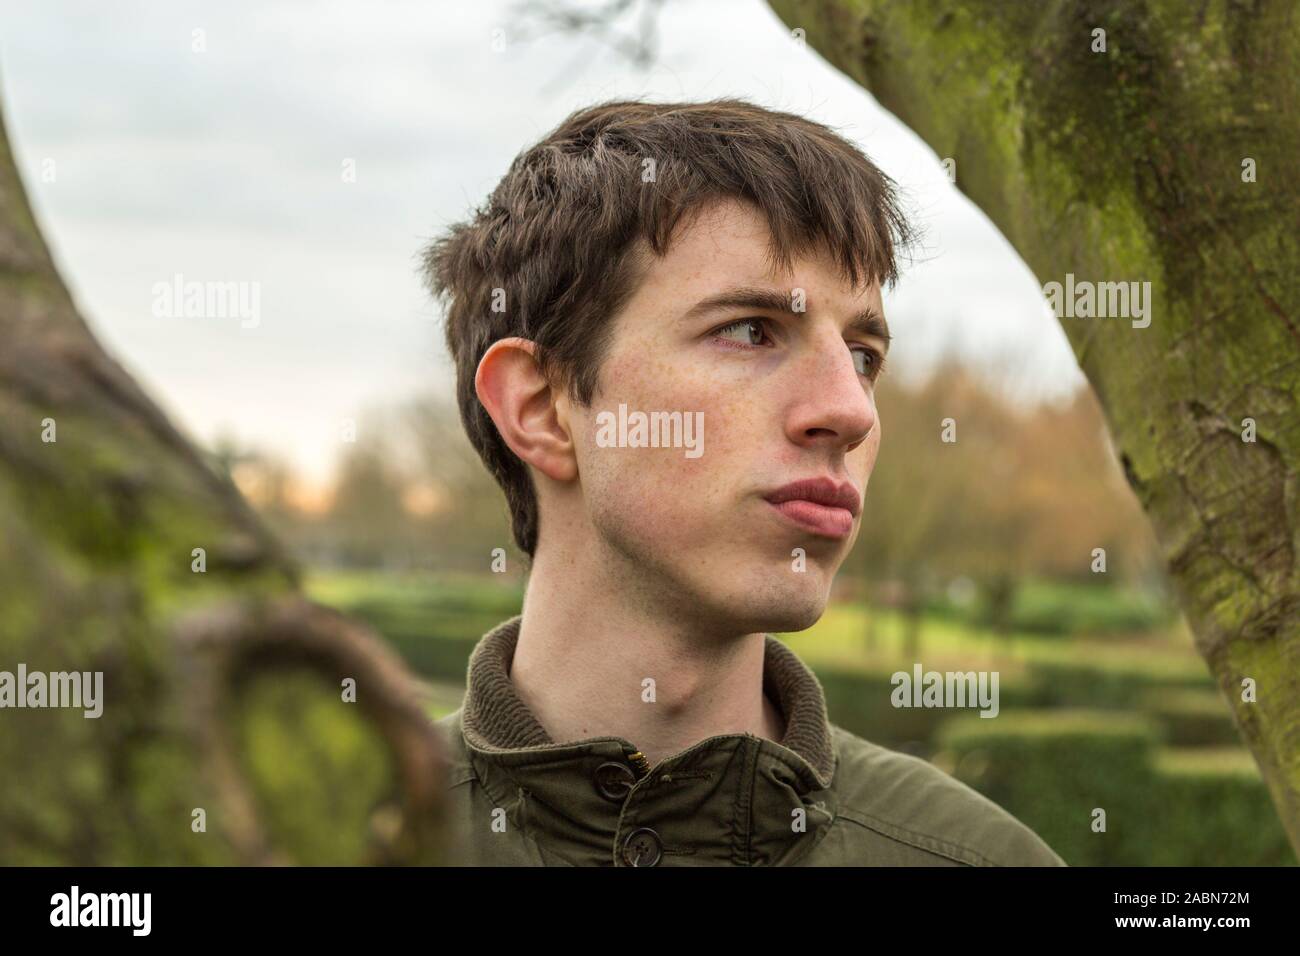 A young man standing among trees looks out with an air of sadness. Stock Photo